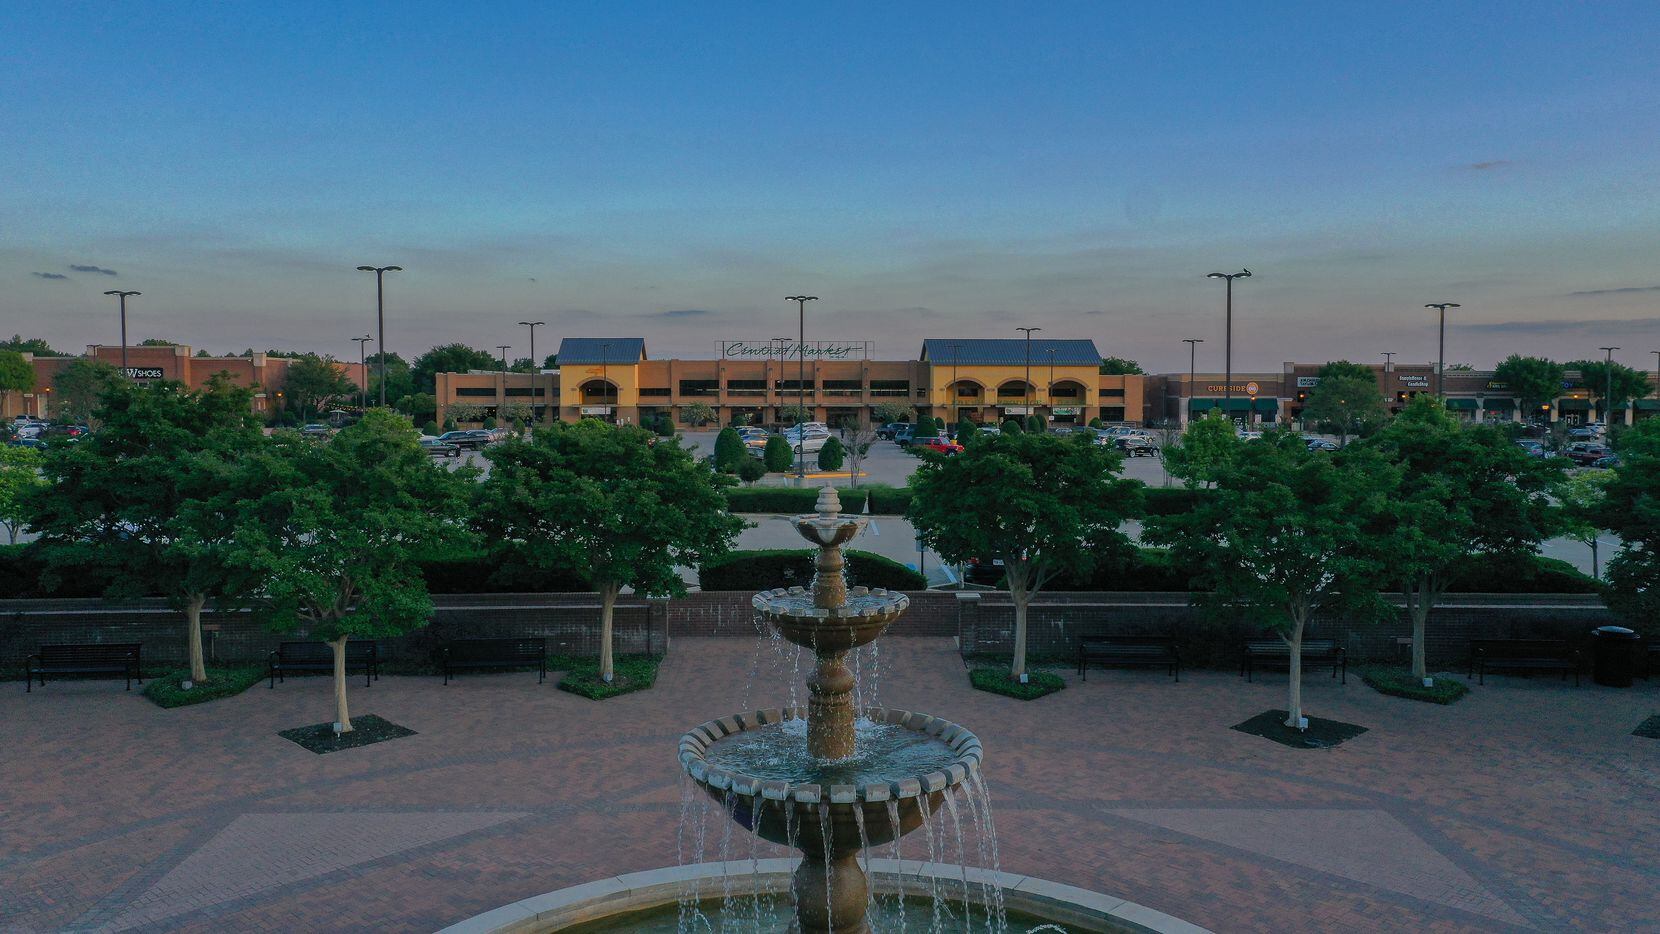 Shops of Southlake is one of the North Texas retail centers seeing an uptick in leases for...